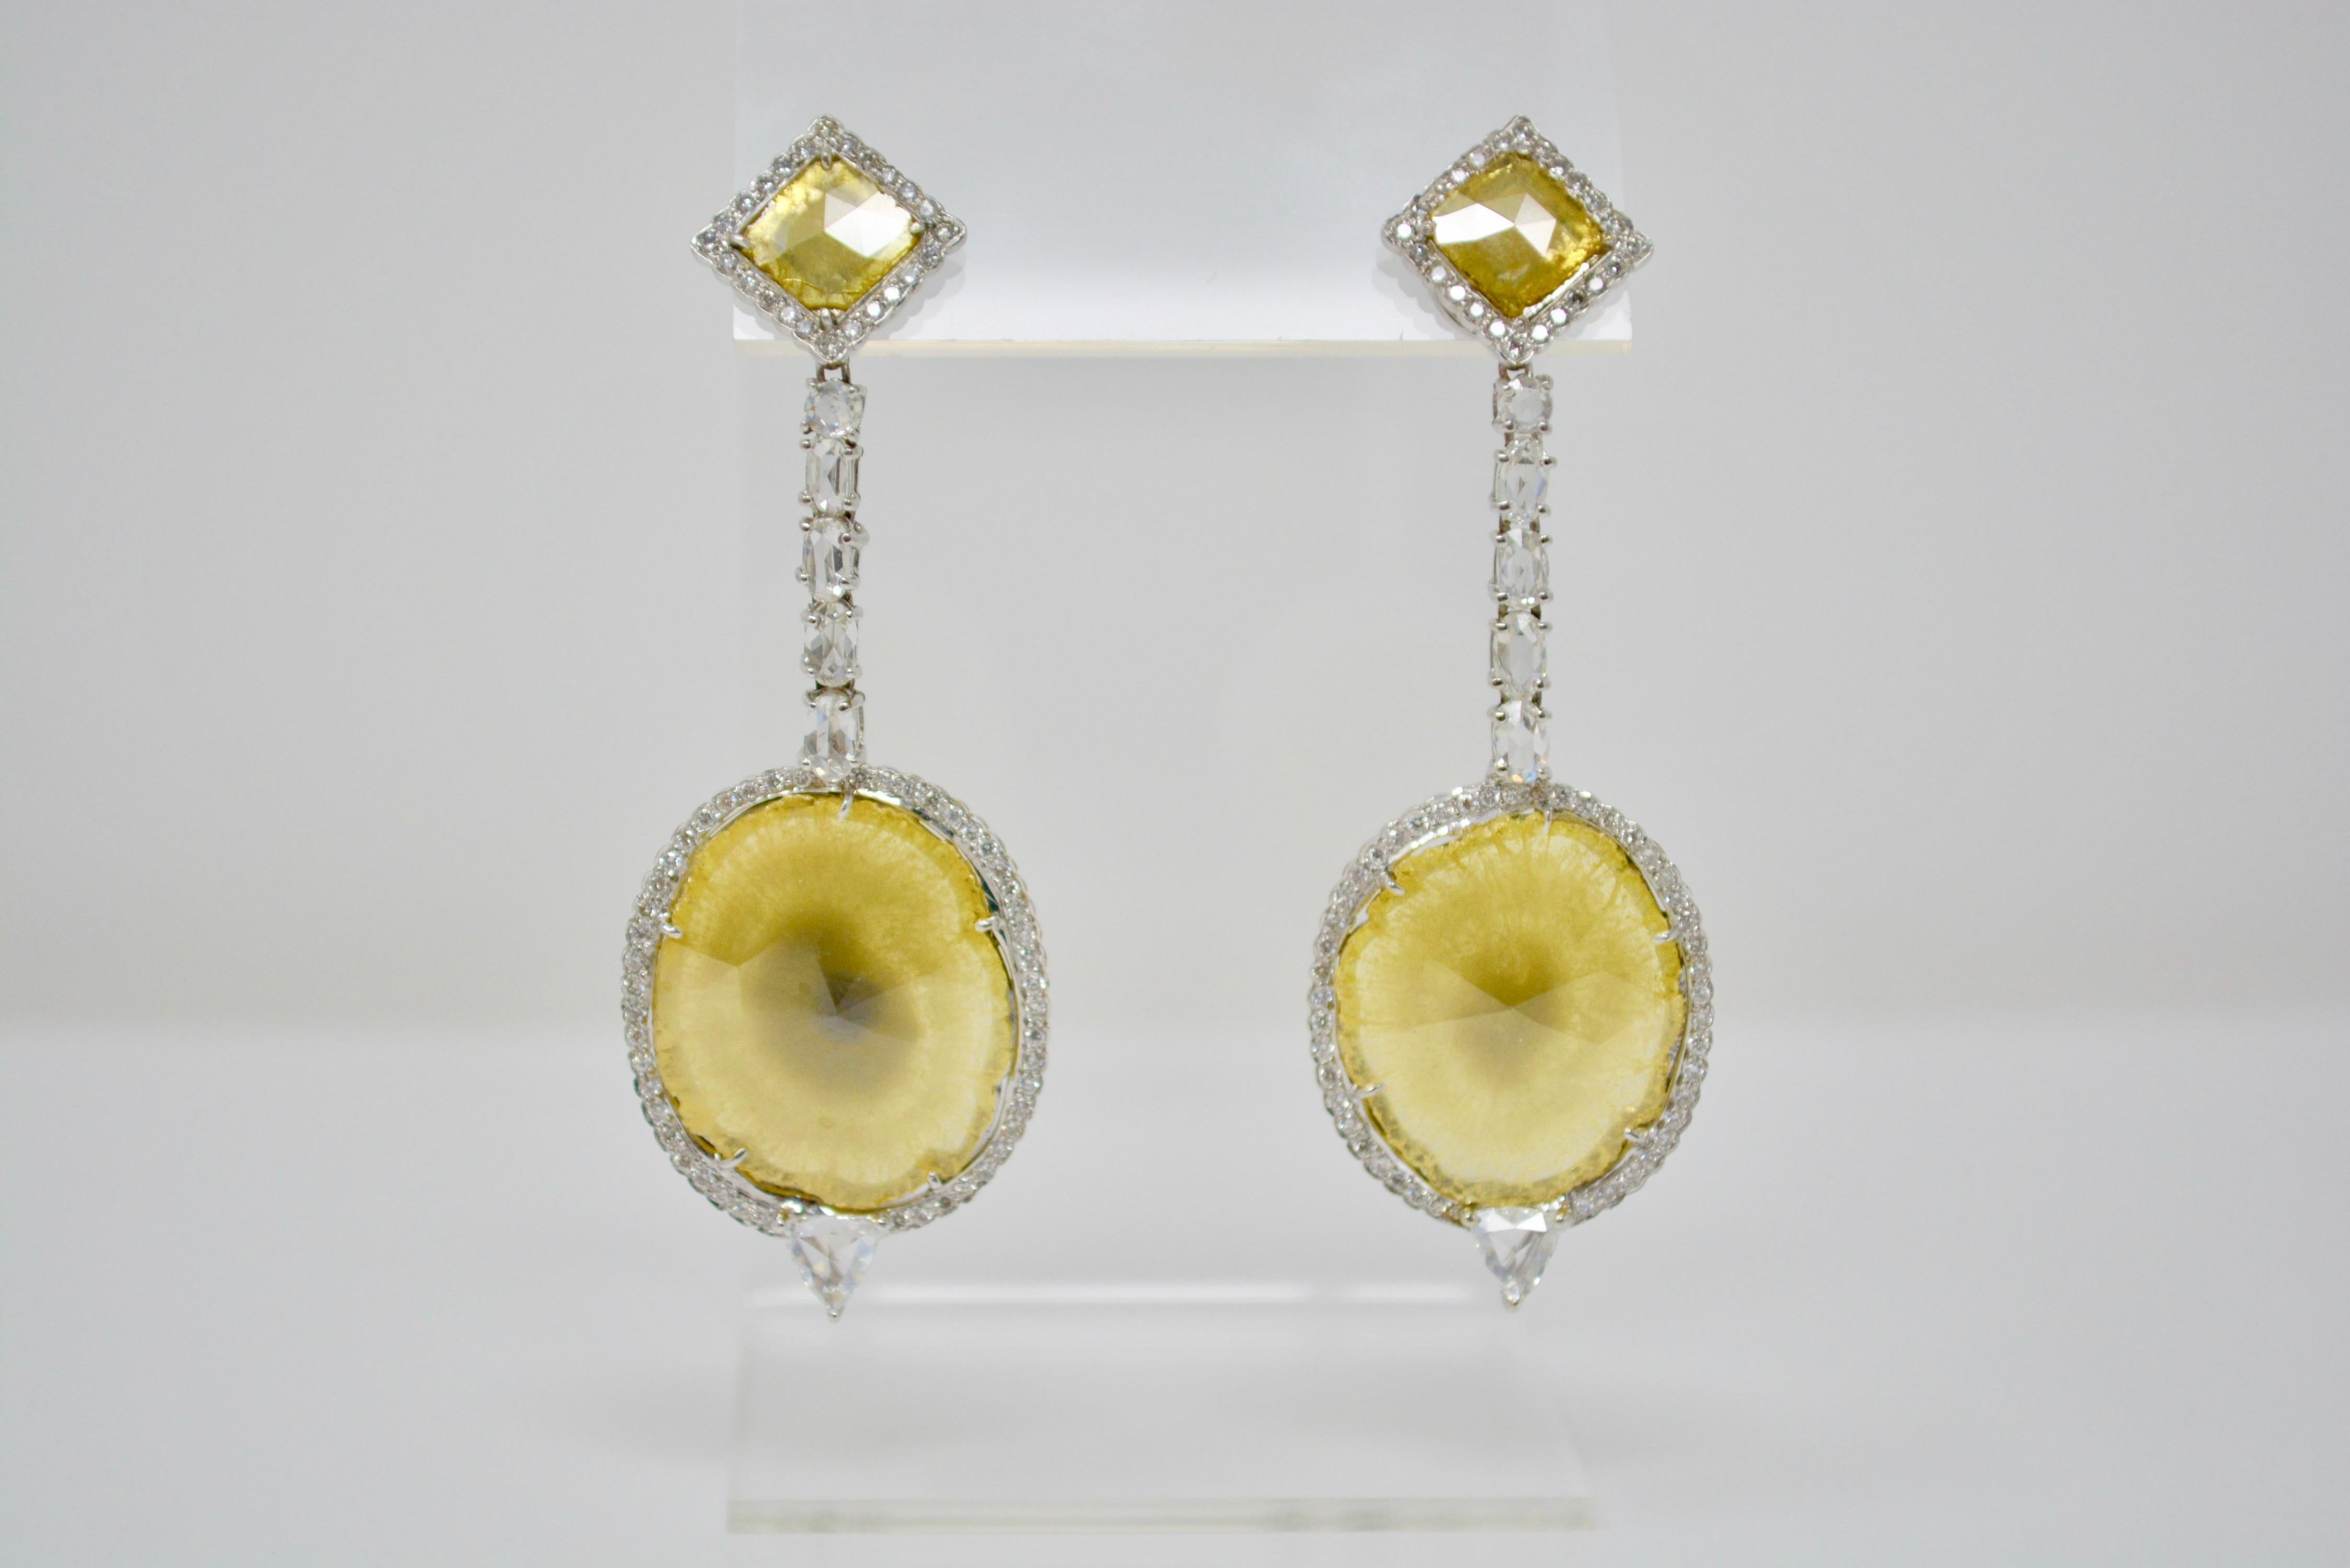 Contemporary 18.09 Carat Natural Yellow Slice Diamond and White Diamond Earrings For Sale